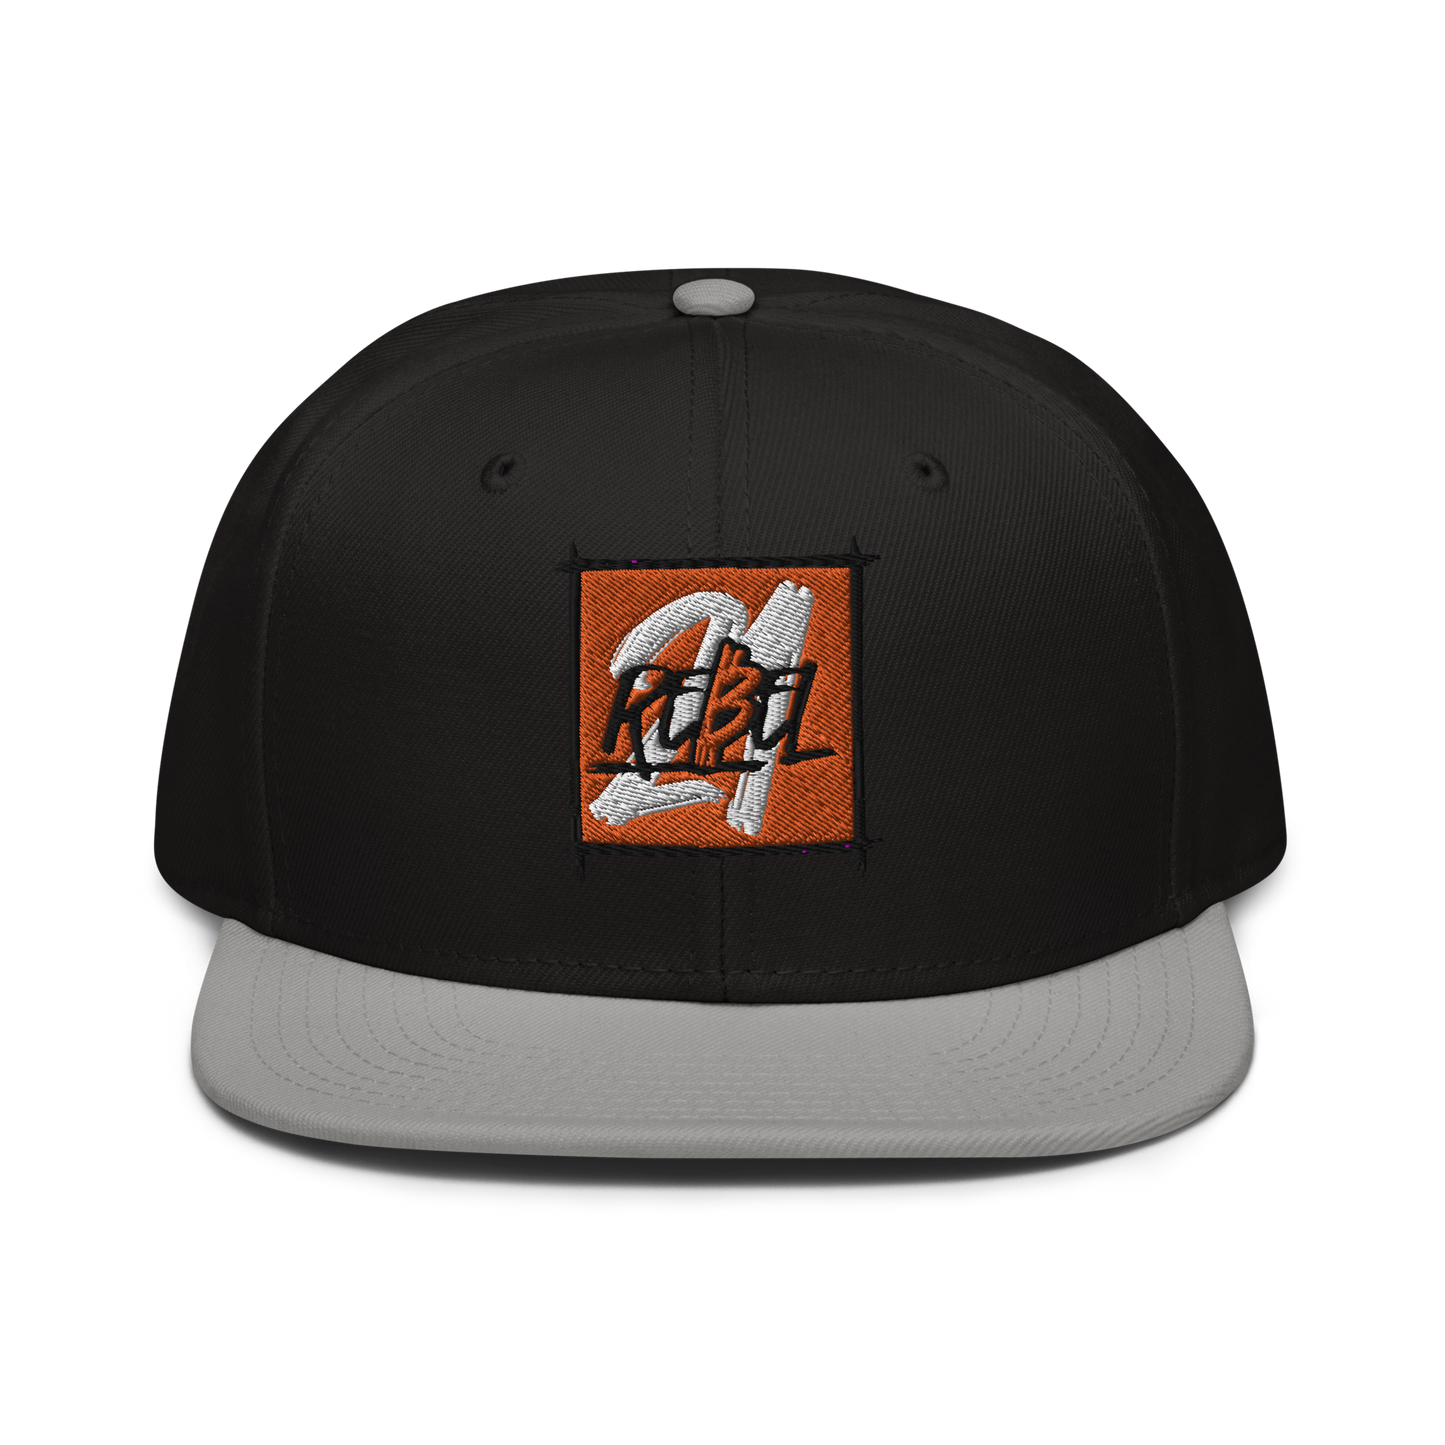 Front view of a black and grey bitcoin snapback hat.